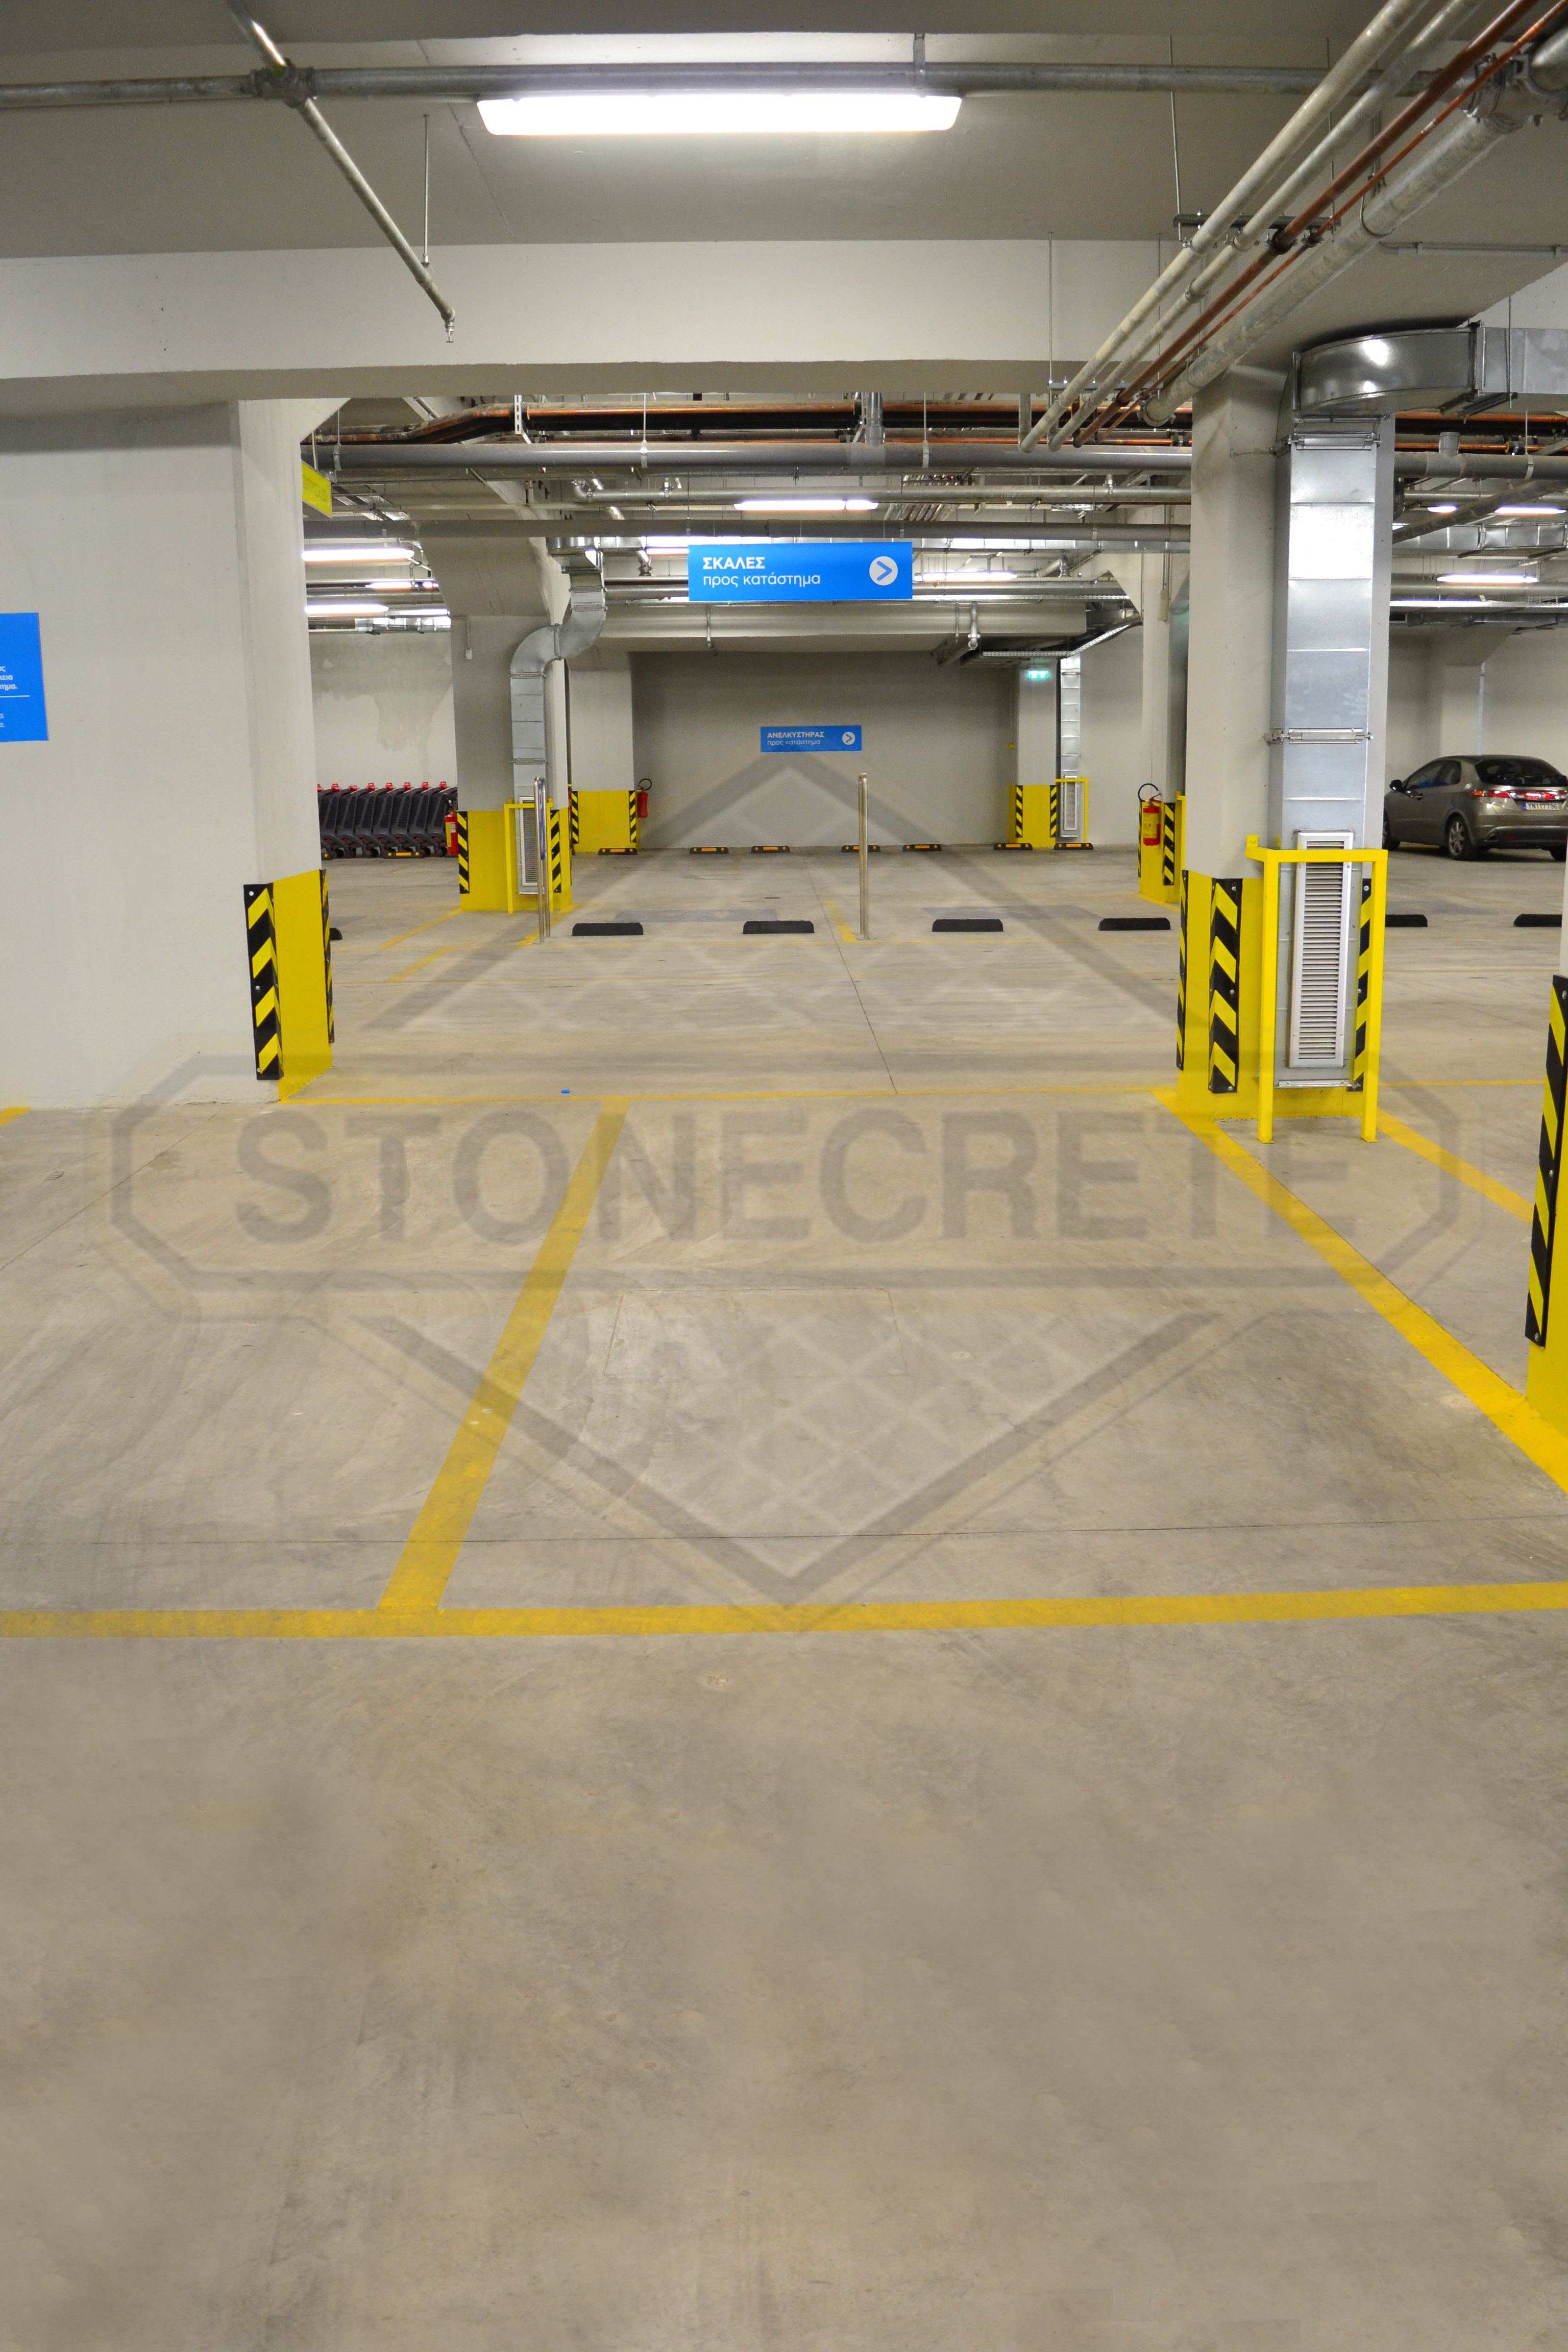 STONECRETE INDUSTRIAL FLOORS AND SAFETY RAMPS, CONSTRUCTED WITH THE USE OF STONECRETE COLOUR HARDENERS AND SEALER WITH STONECRETE SUPER PENETRATING SEALER